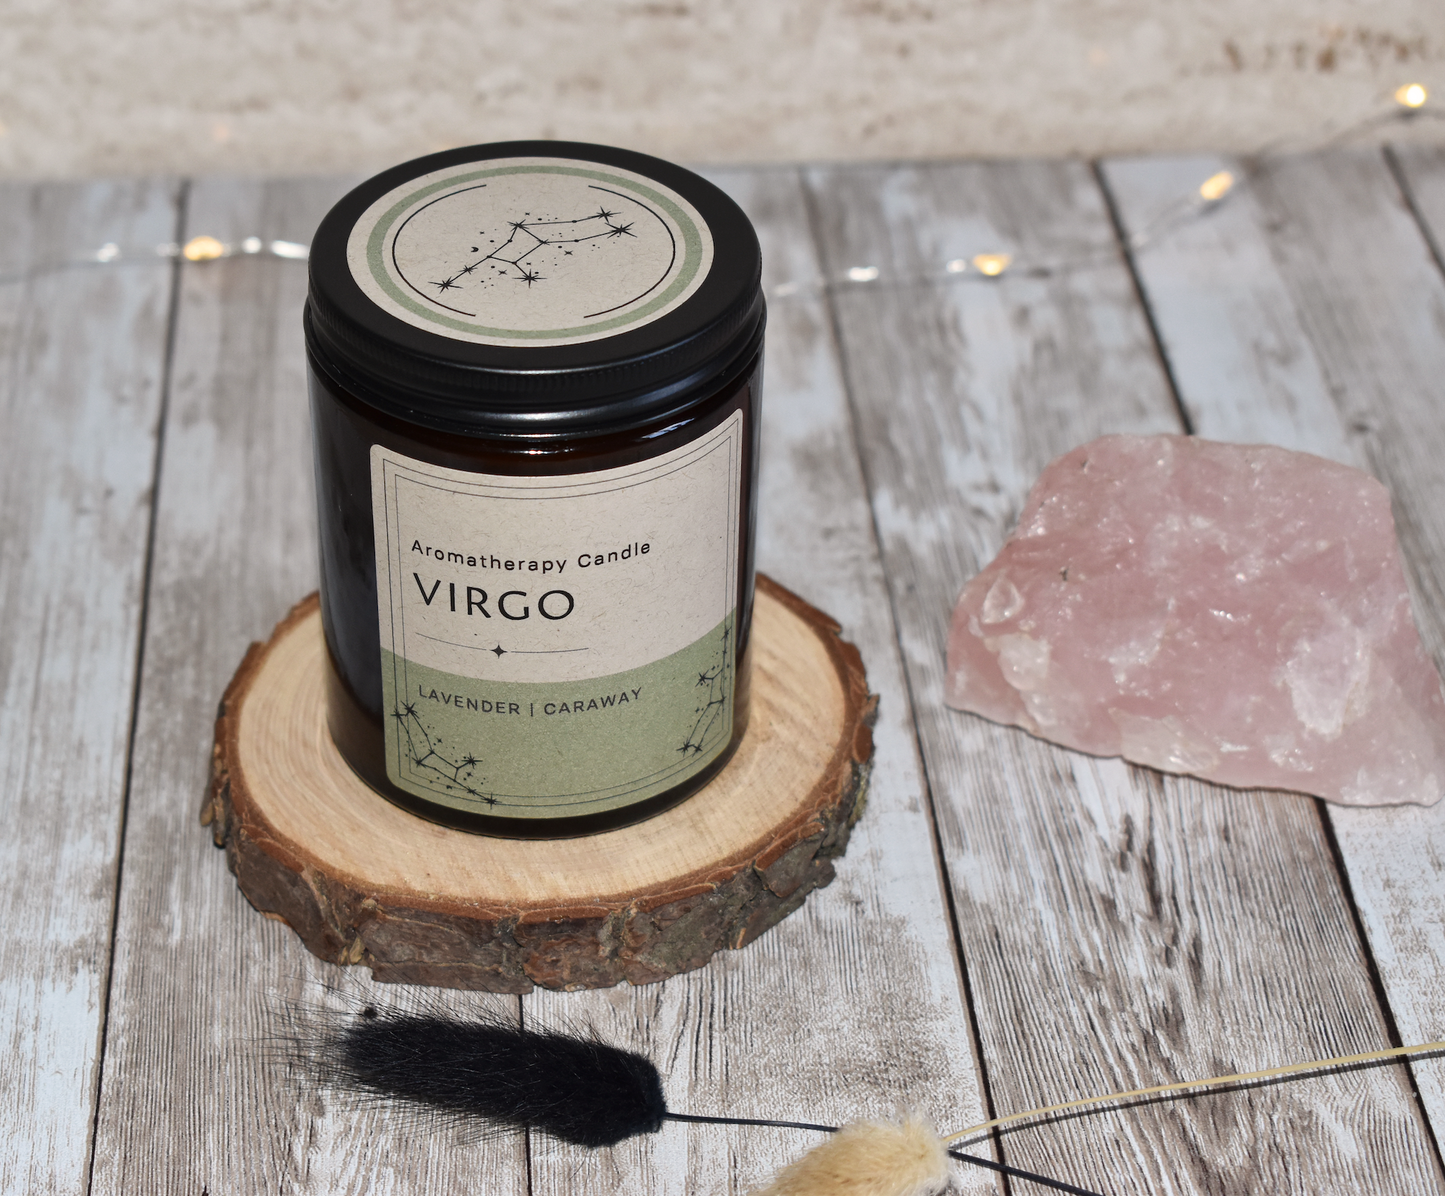 Zodiac Candle VIRGO  - Lavender & Caraway Aromatherpy Candle,  Astrology Candle